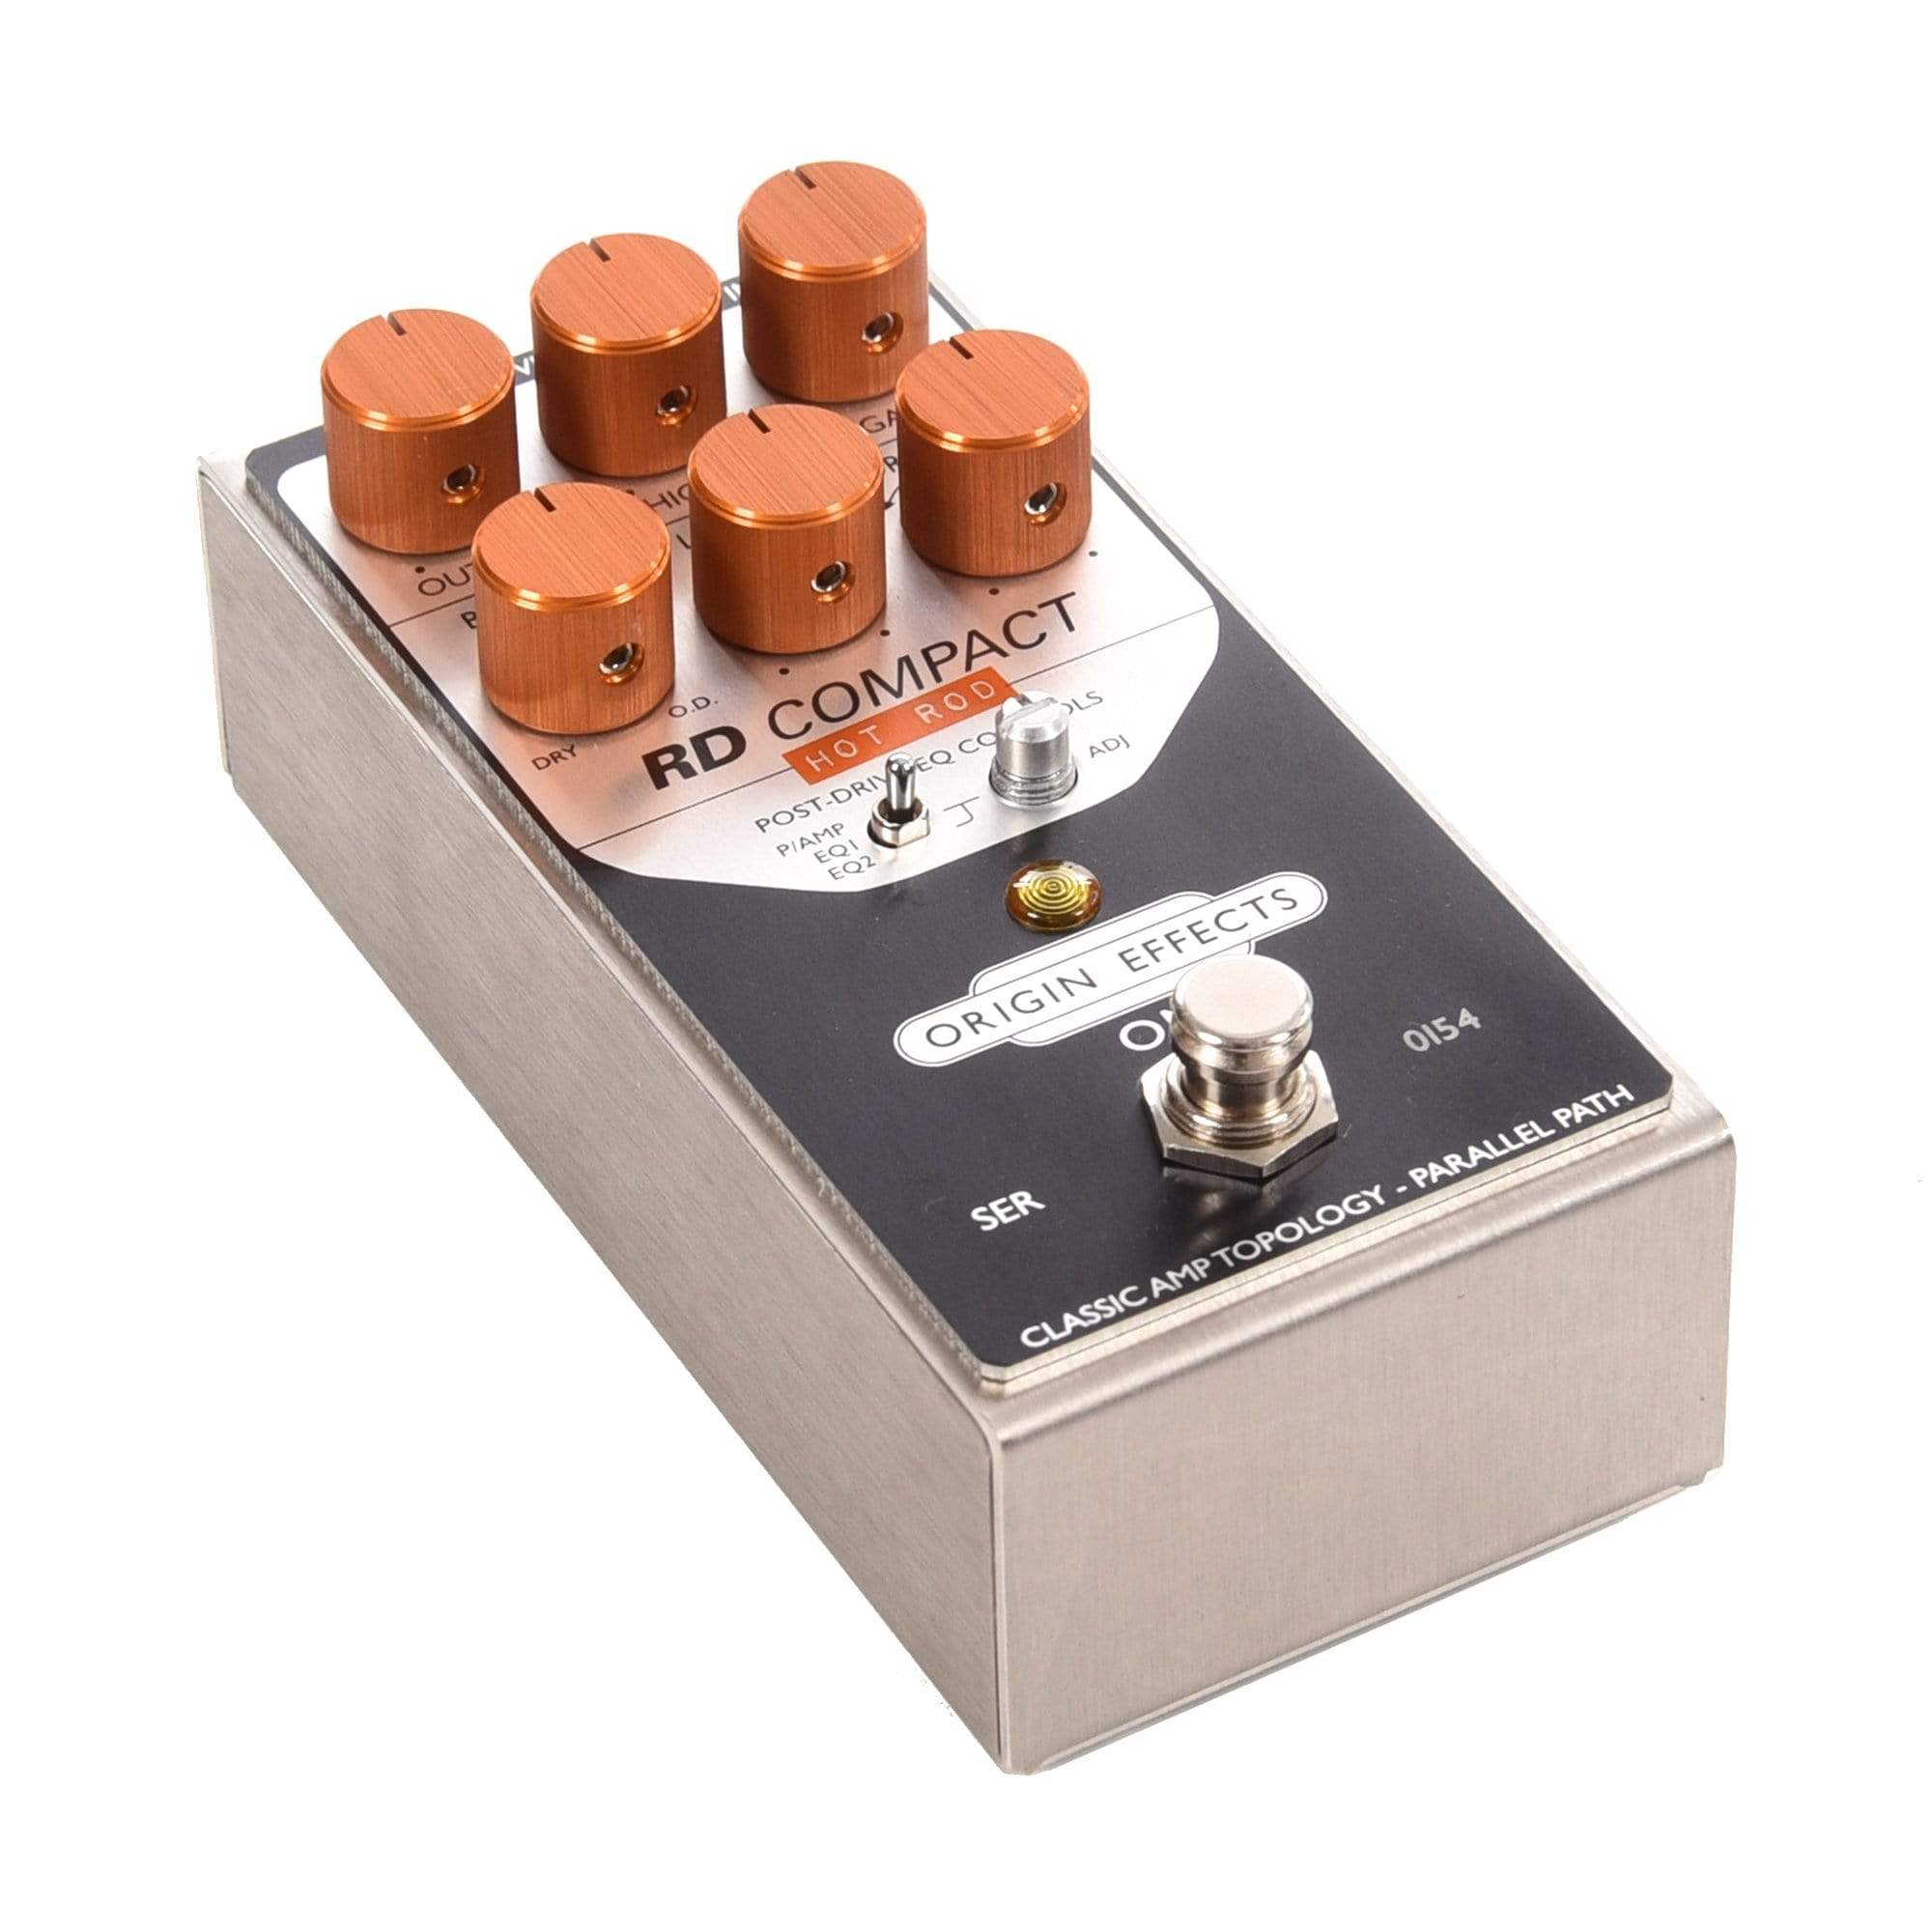 Origin Effects RD Compact Hot Rod Overdrive Pedal